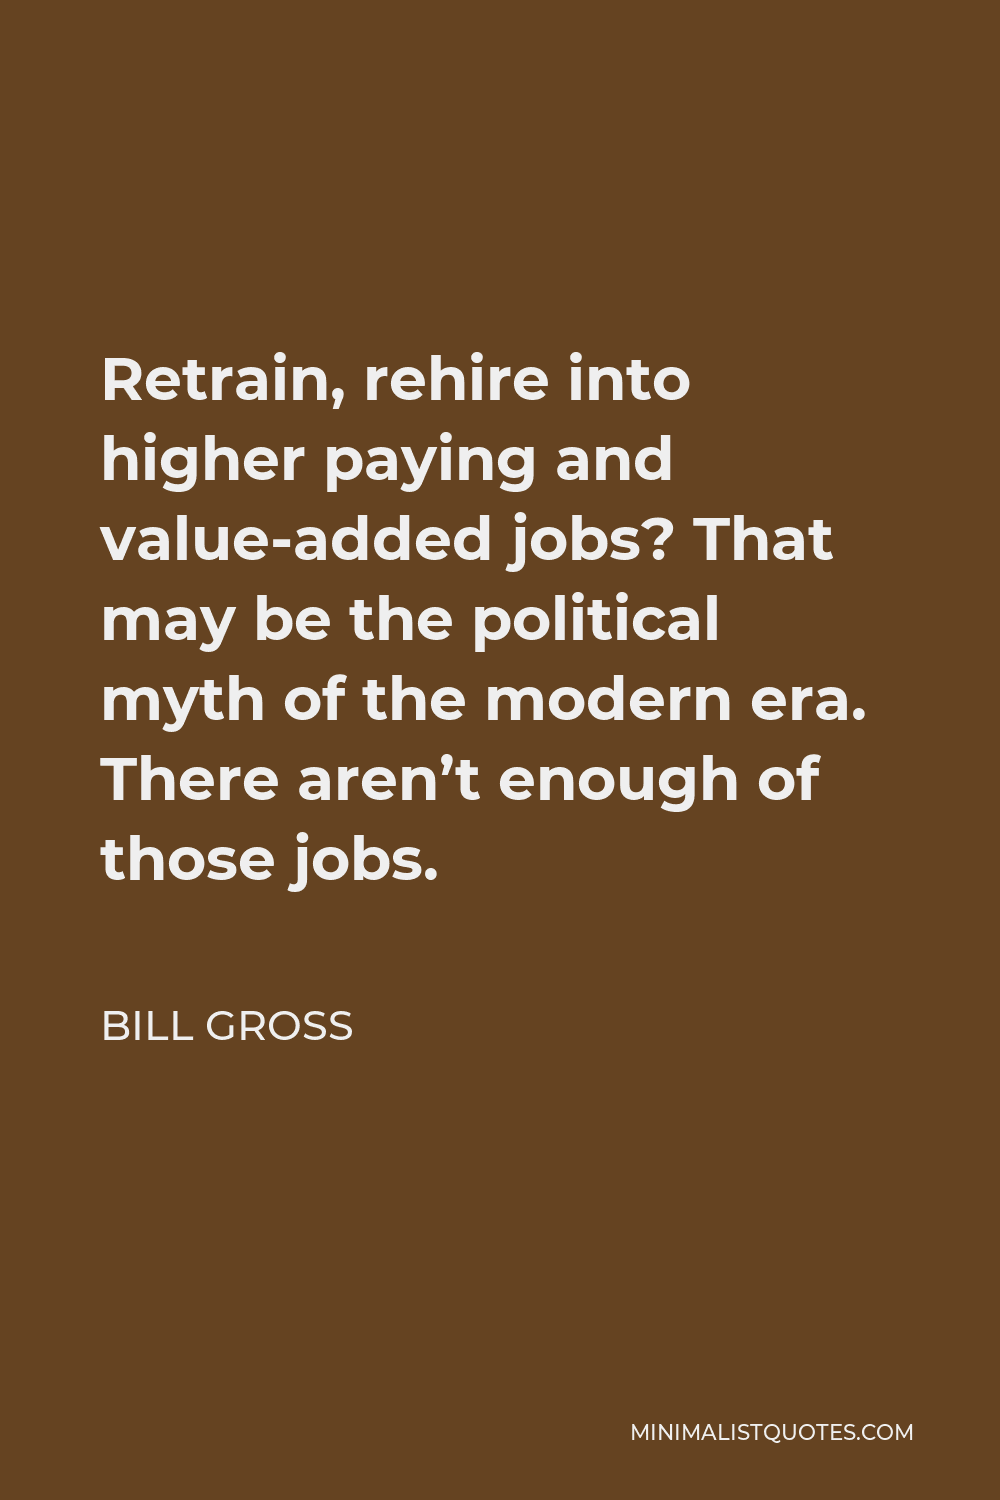 Bill Gross Quote - Retrain, rehire into higher paying and value-added jobs? That may be the political myth of the modern era. There aren’t enough of those jobs.